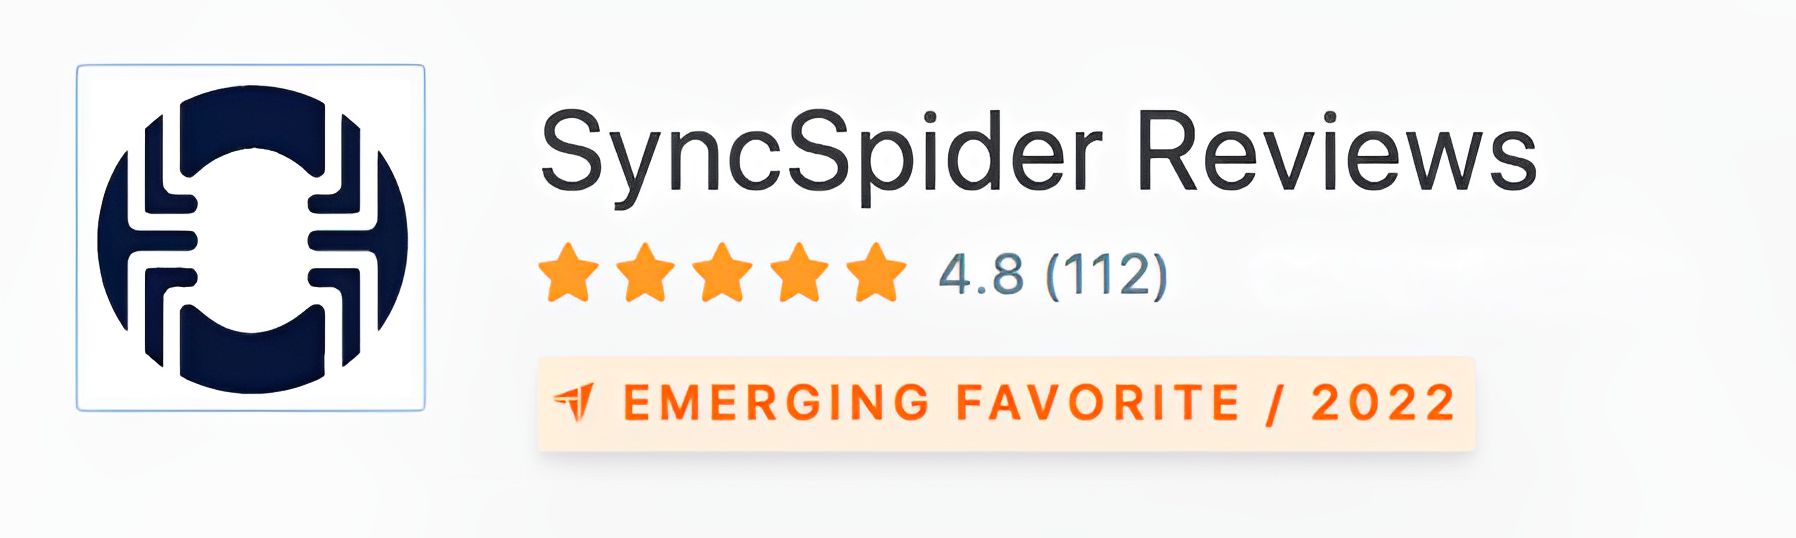 SyncSpider Capterra Reviews Score 4.8 Emerging Favorite